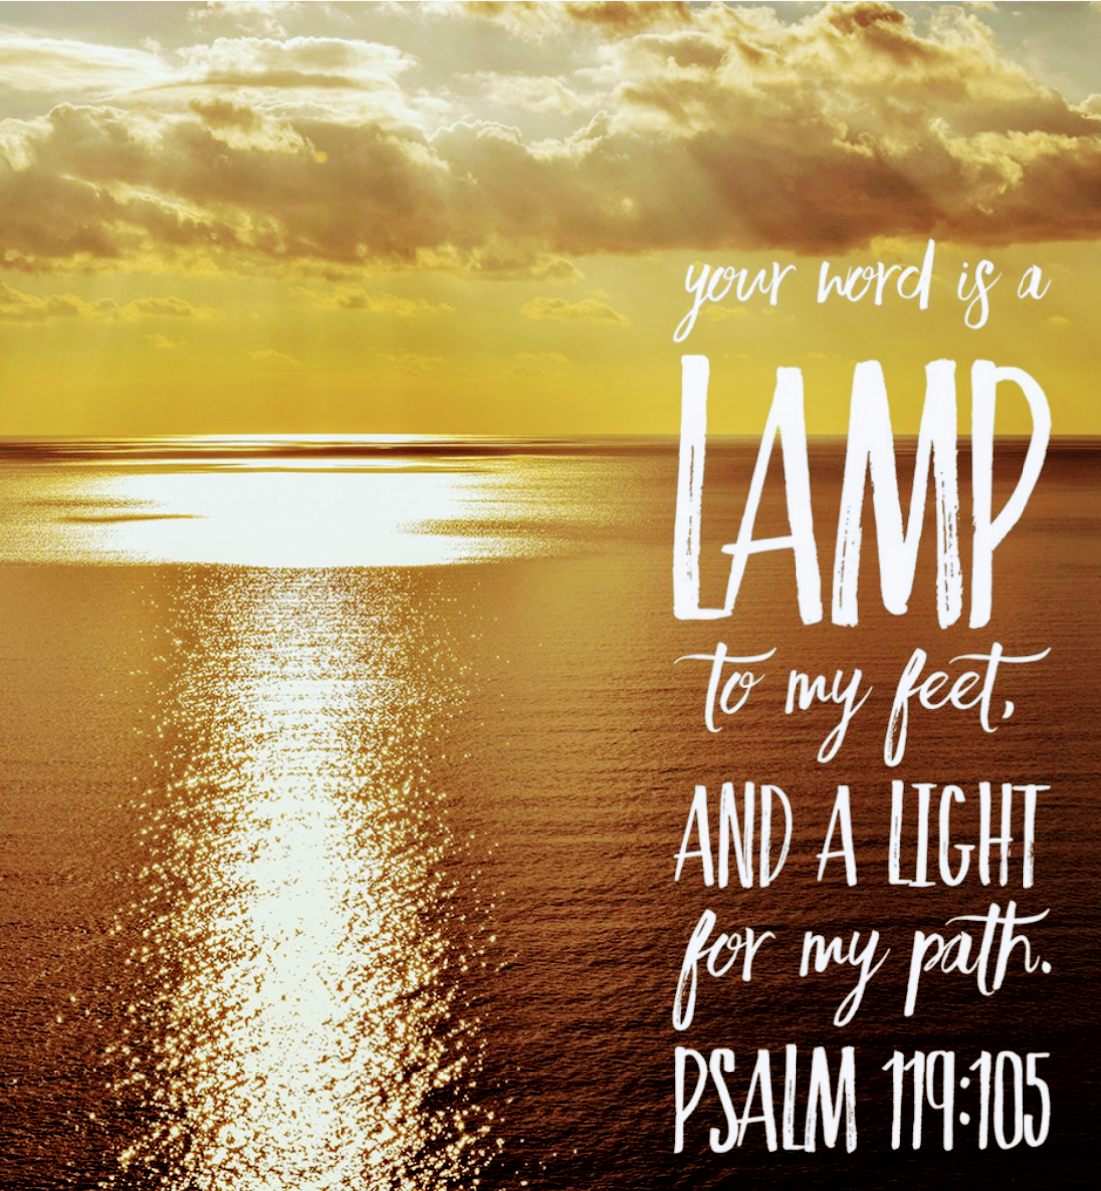 word is a lamp unto my and a light unto path. - Psalm 119:105 | by McGivern | Medium